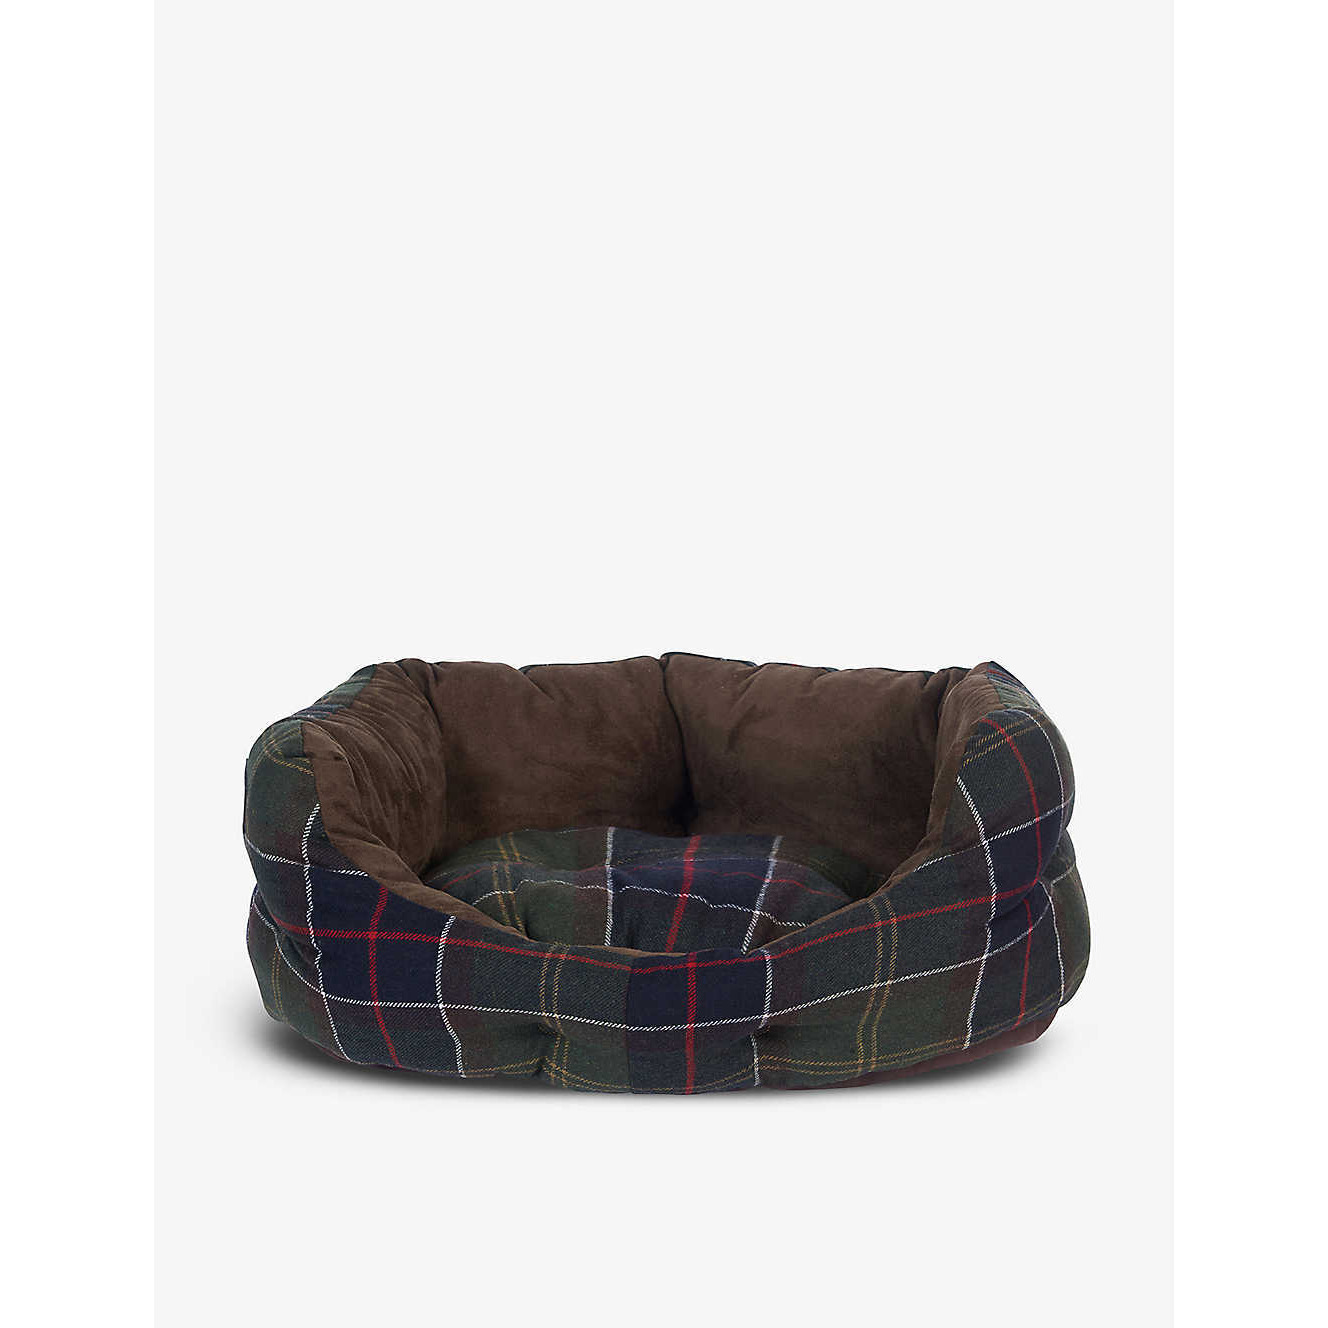 Barbour Black, White and Red Wool Checked Tartan Woven Dog Bed, Size: 60cm